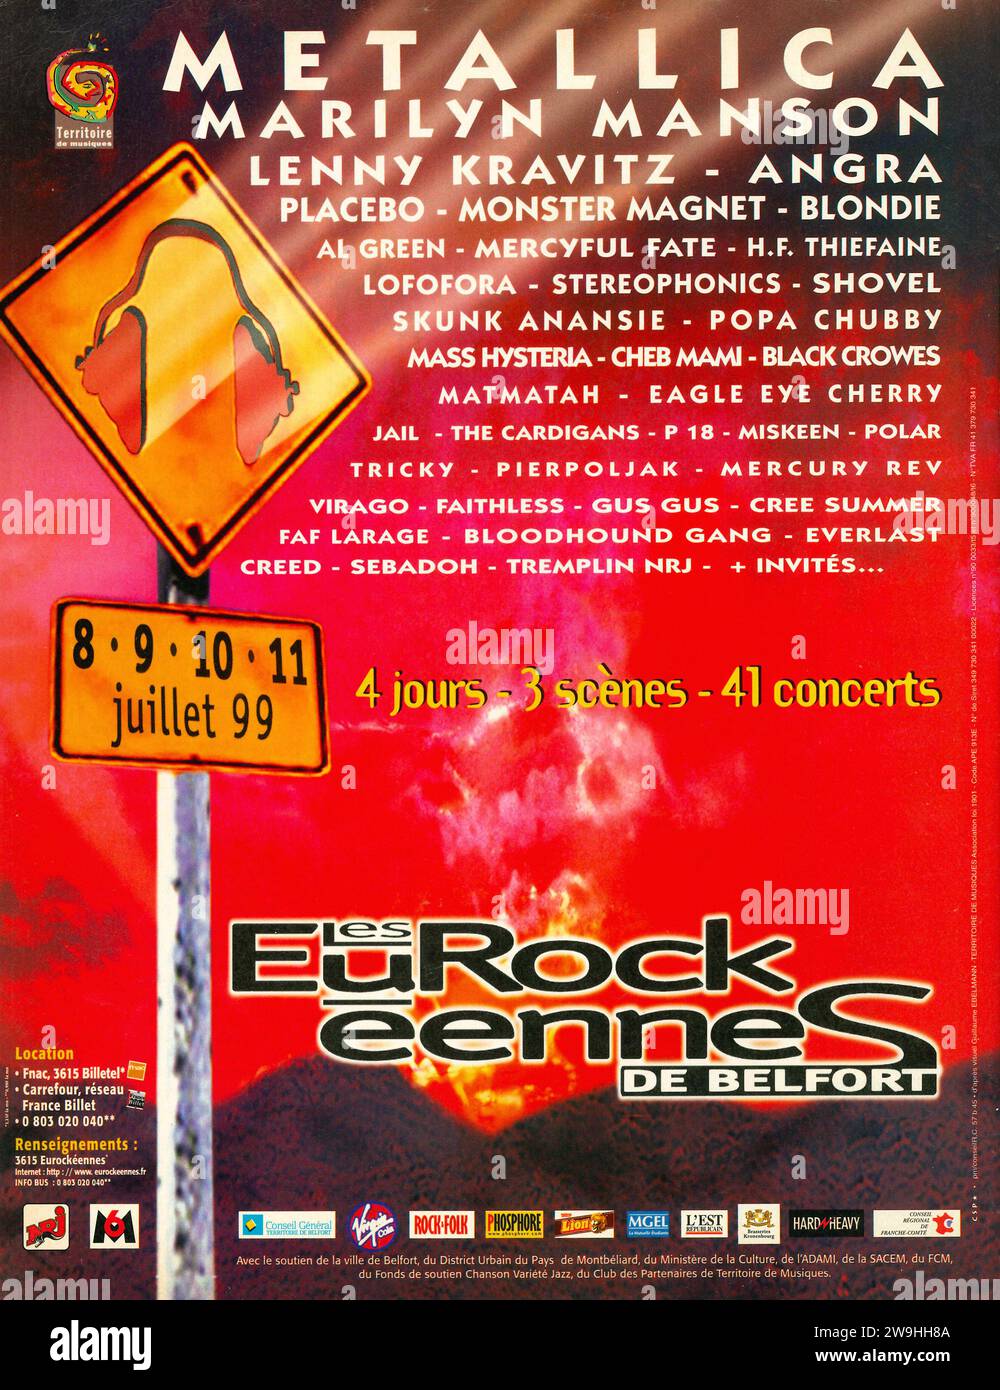 1999 Rock Festival Eurocks- Eurockéennes  de Belfort with Metallica and Marilyn Manson headlining announcement poster in a French magazine Stock Photo